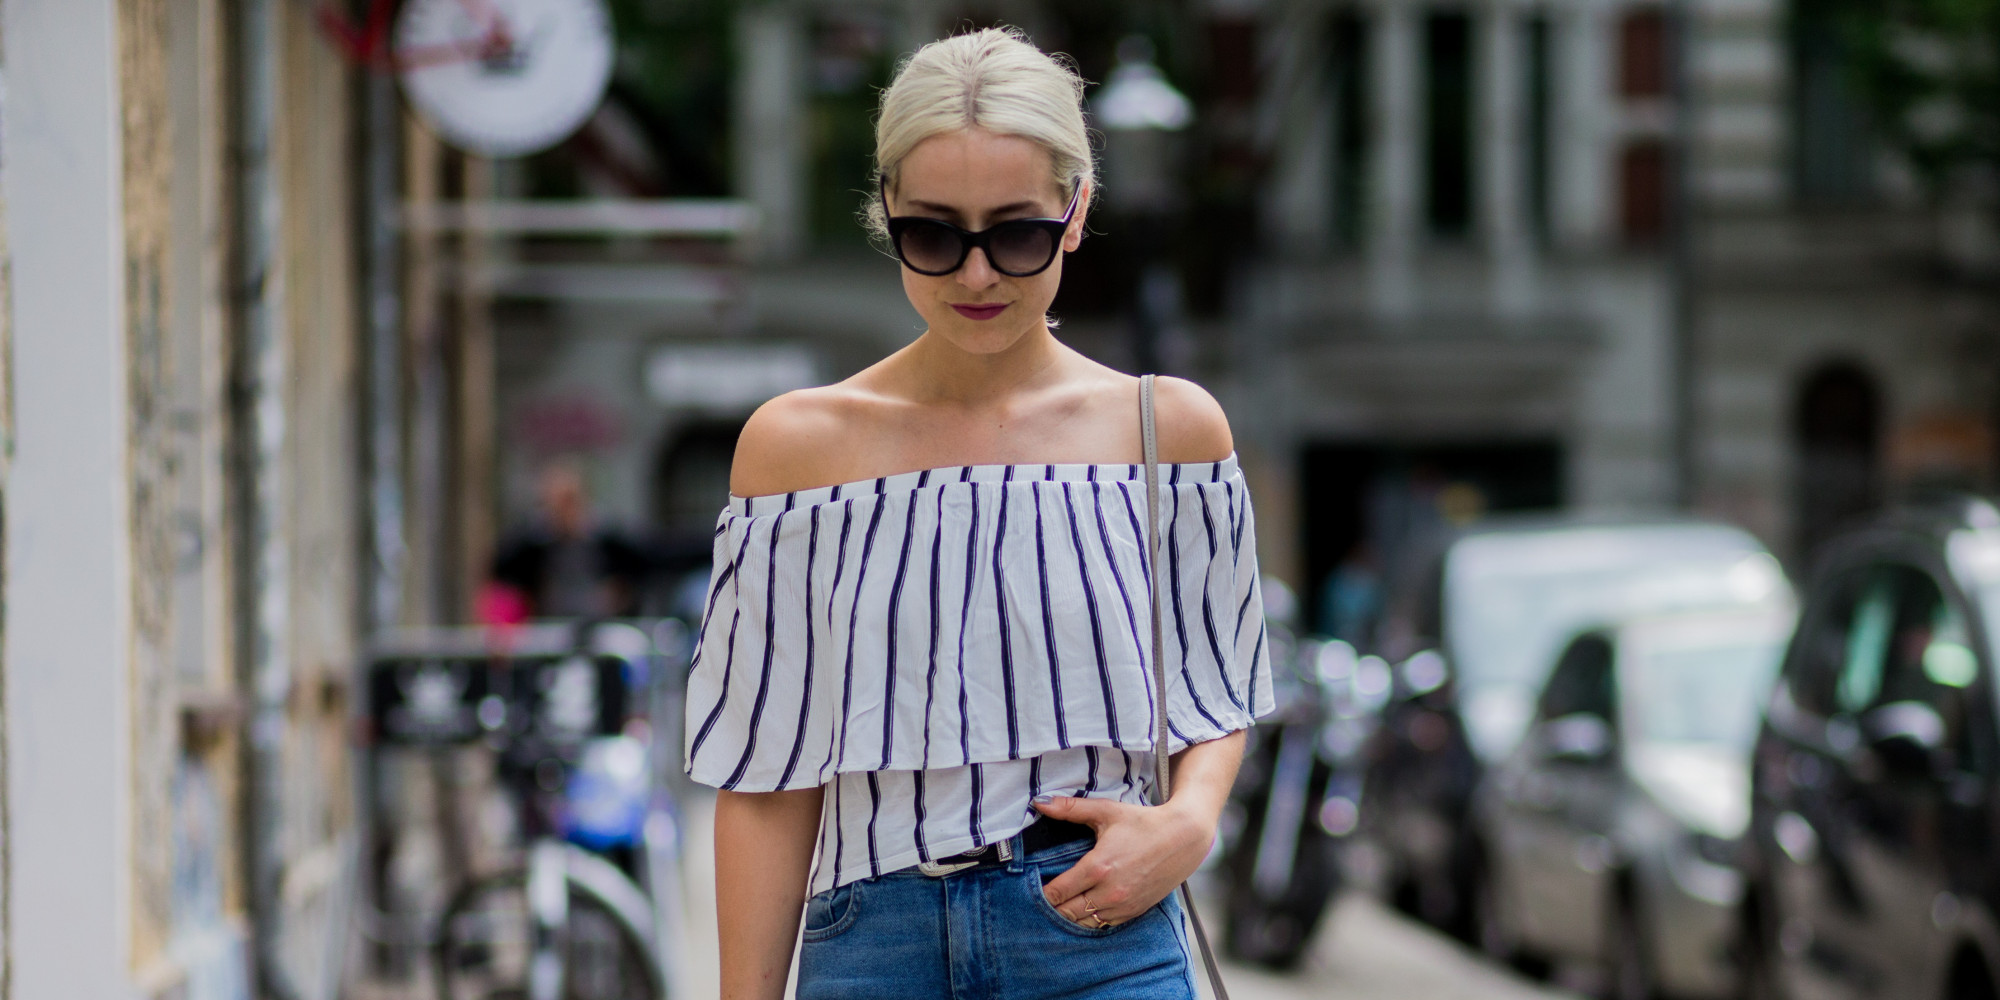 How To Keep Your Off-The-Shoulder Tops In Place With Household Items